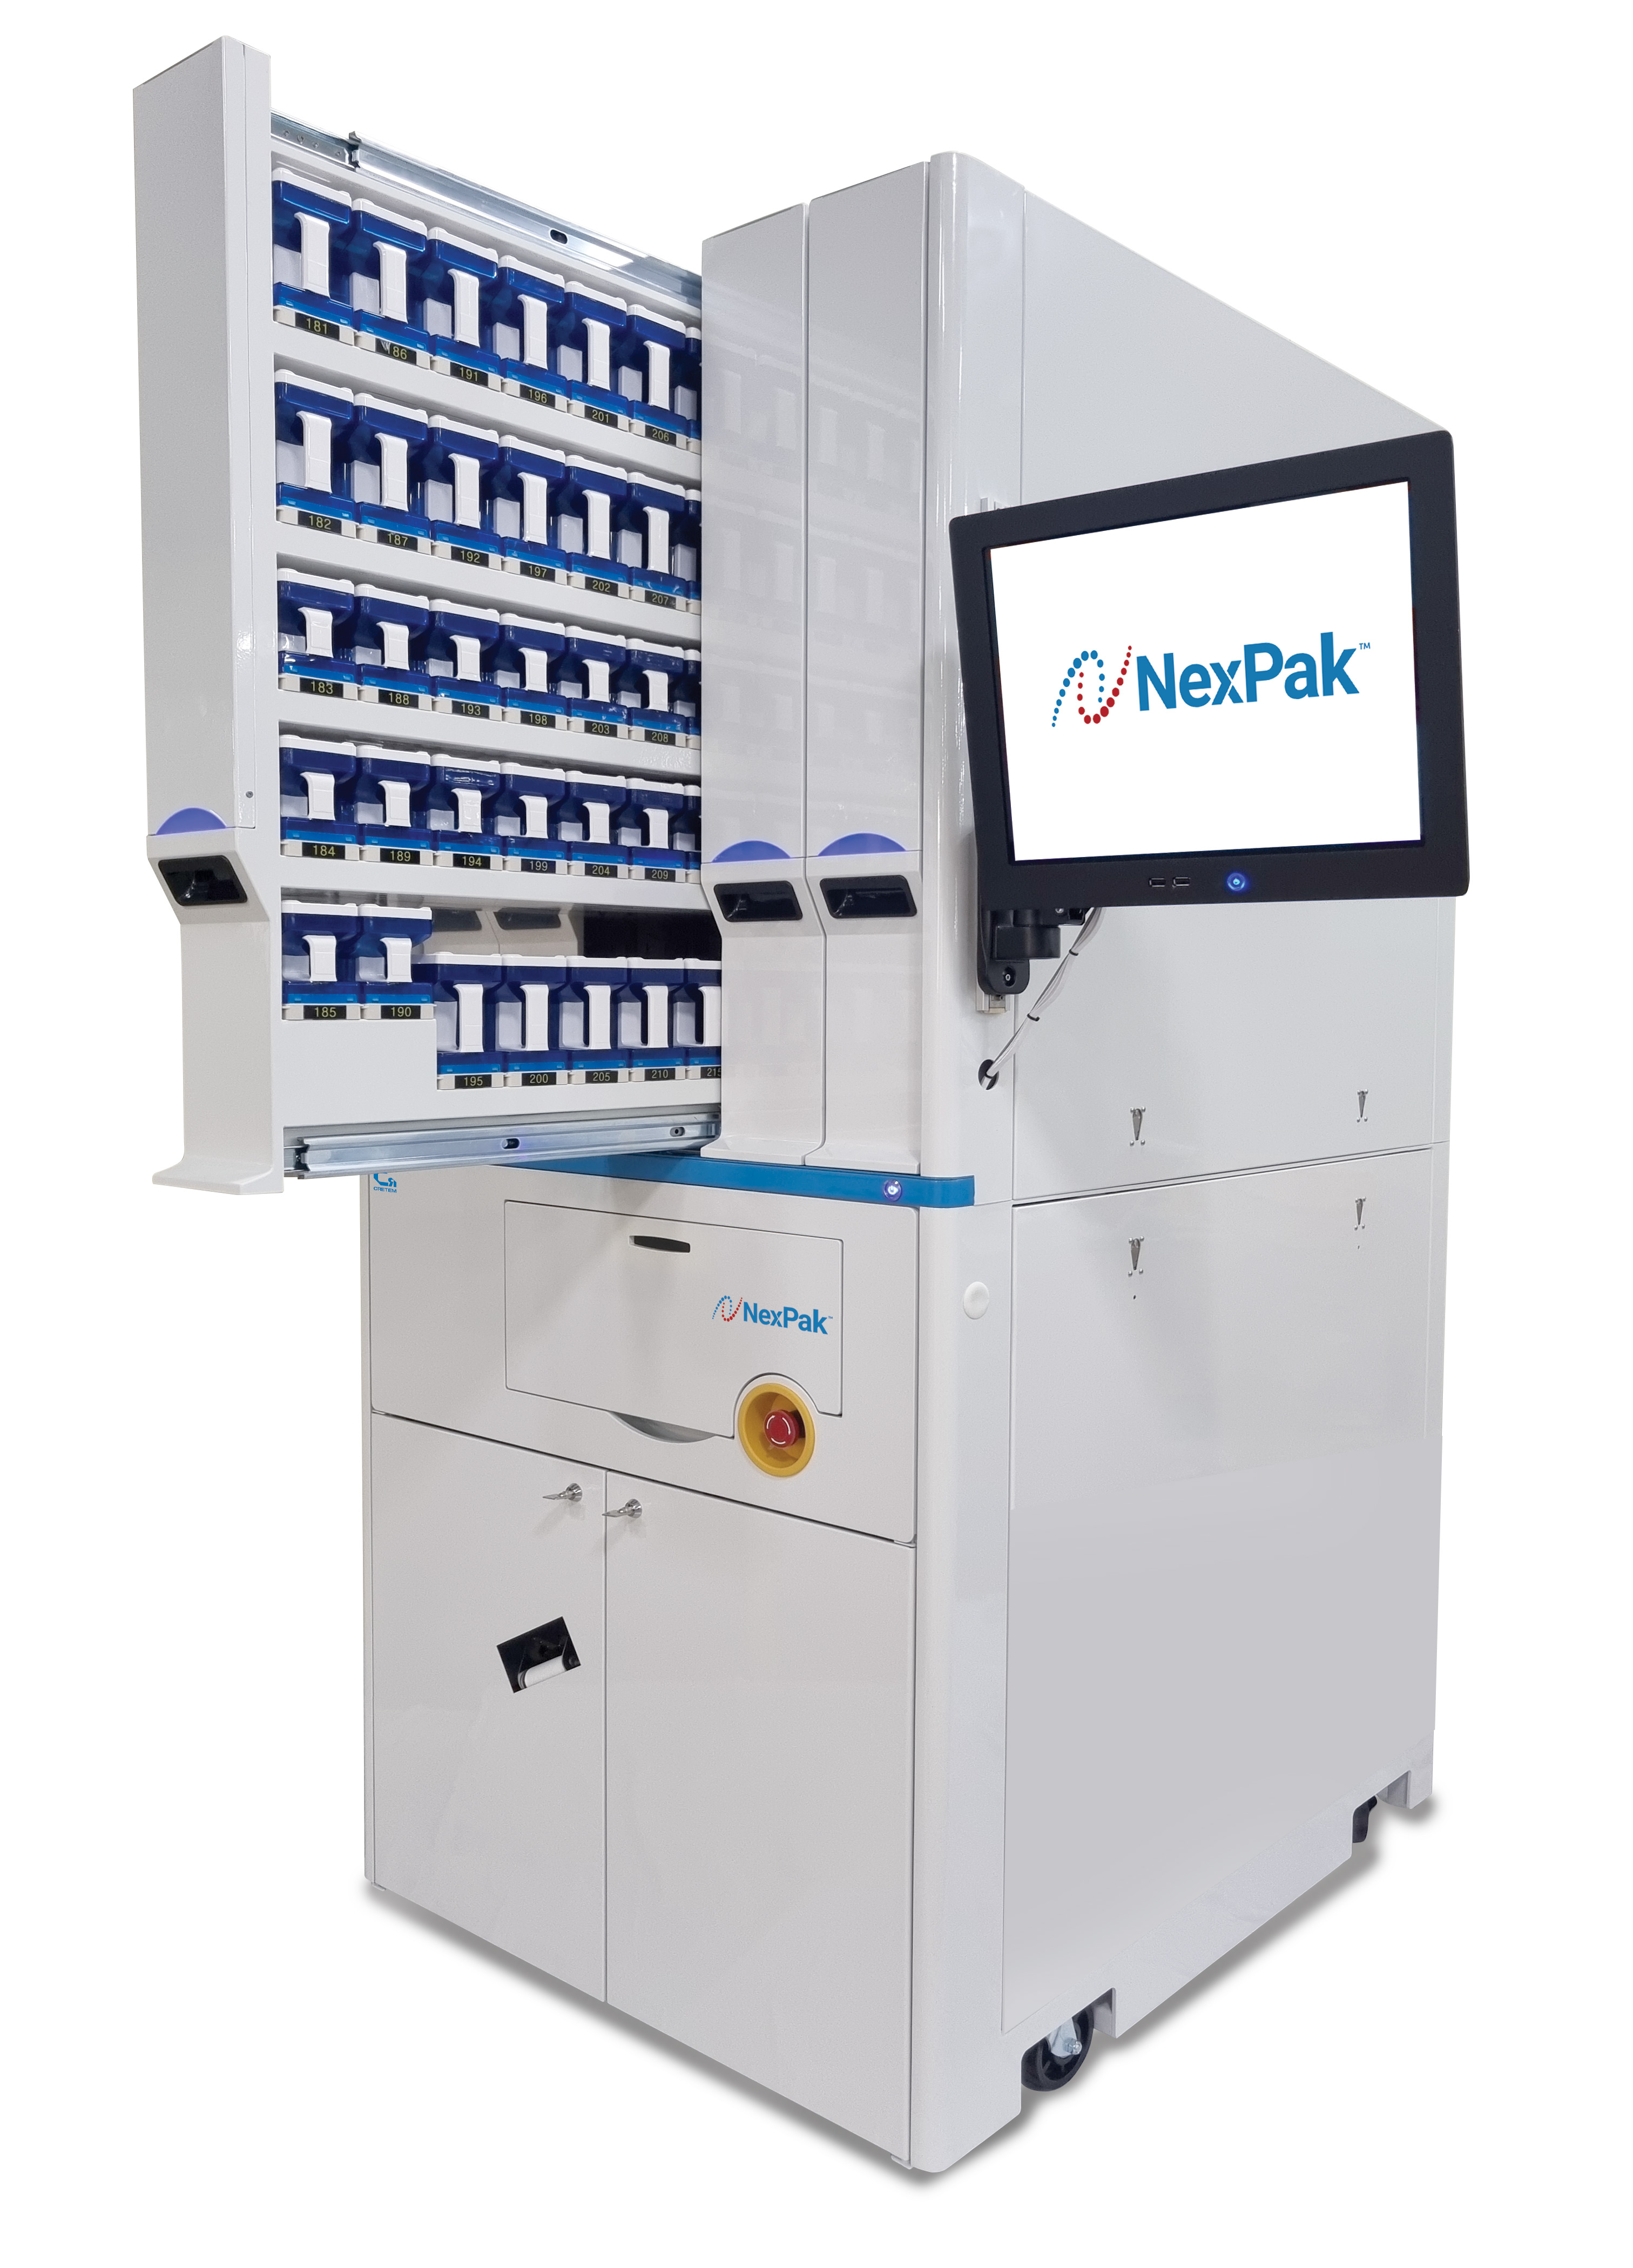 NexPak automated packaging system